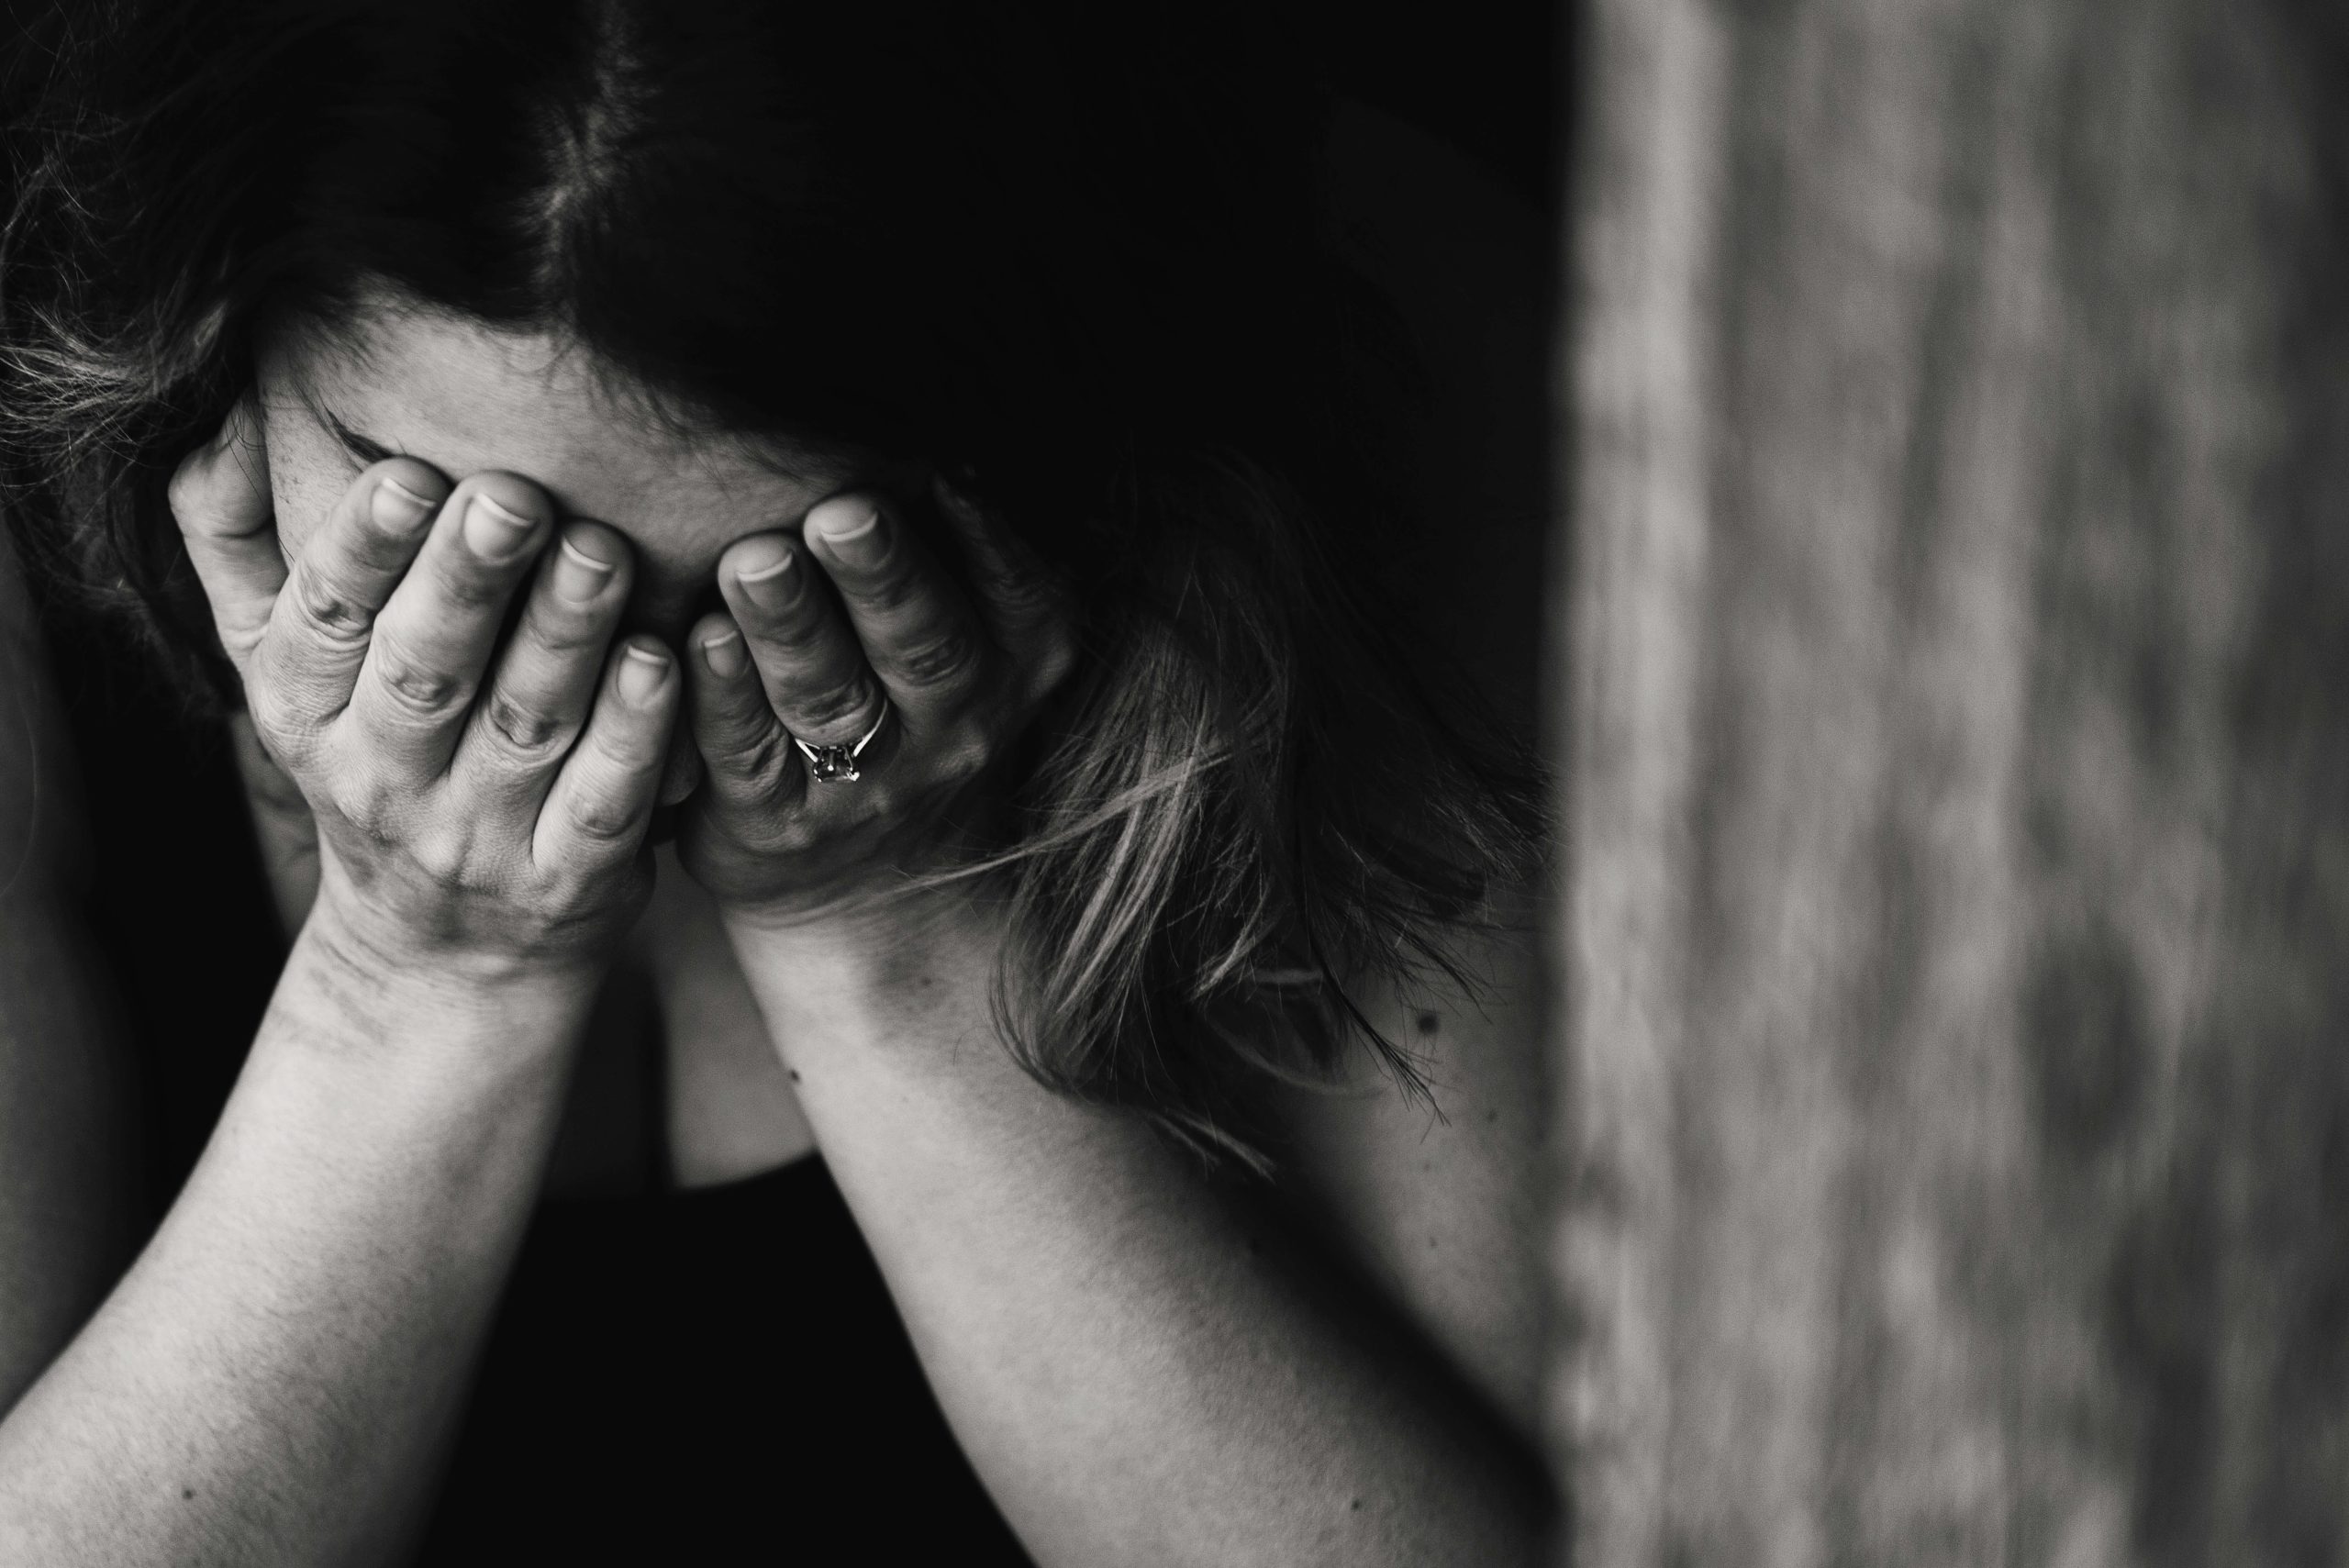 How Can I Recover Emotionally After An Abortion?